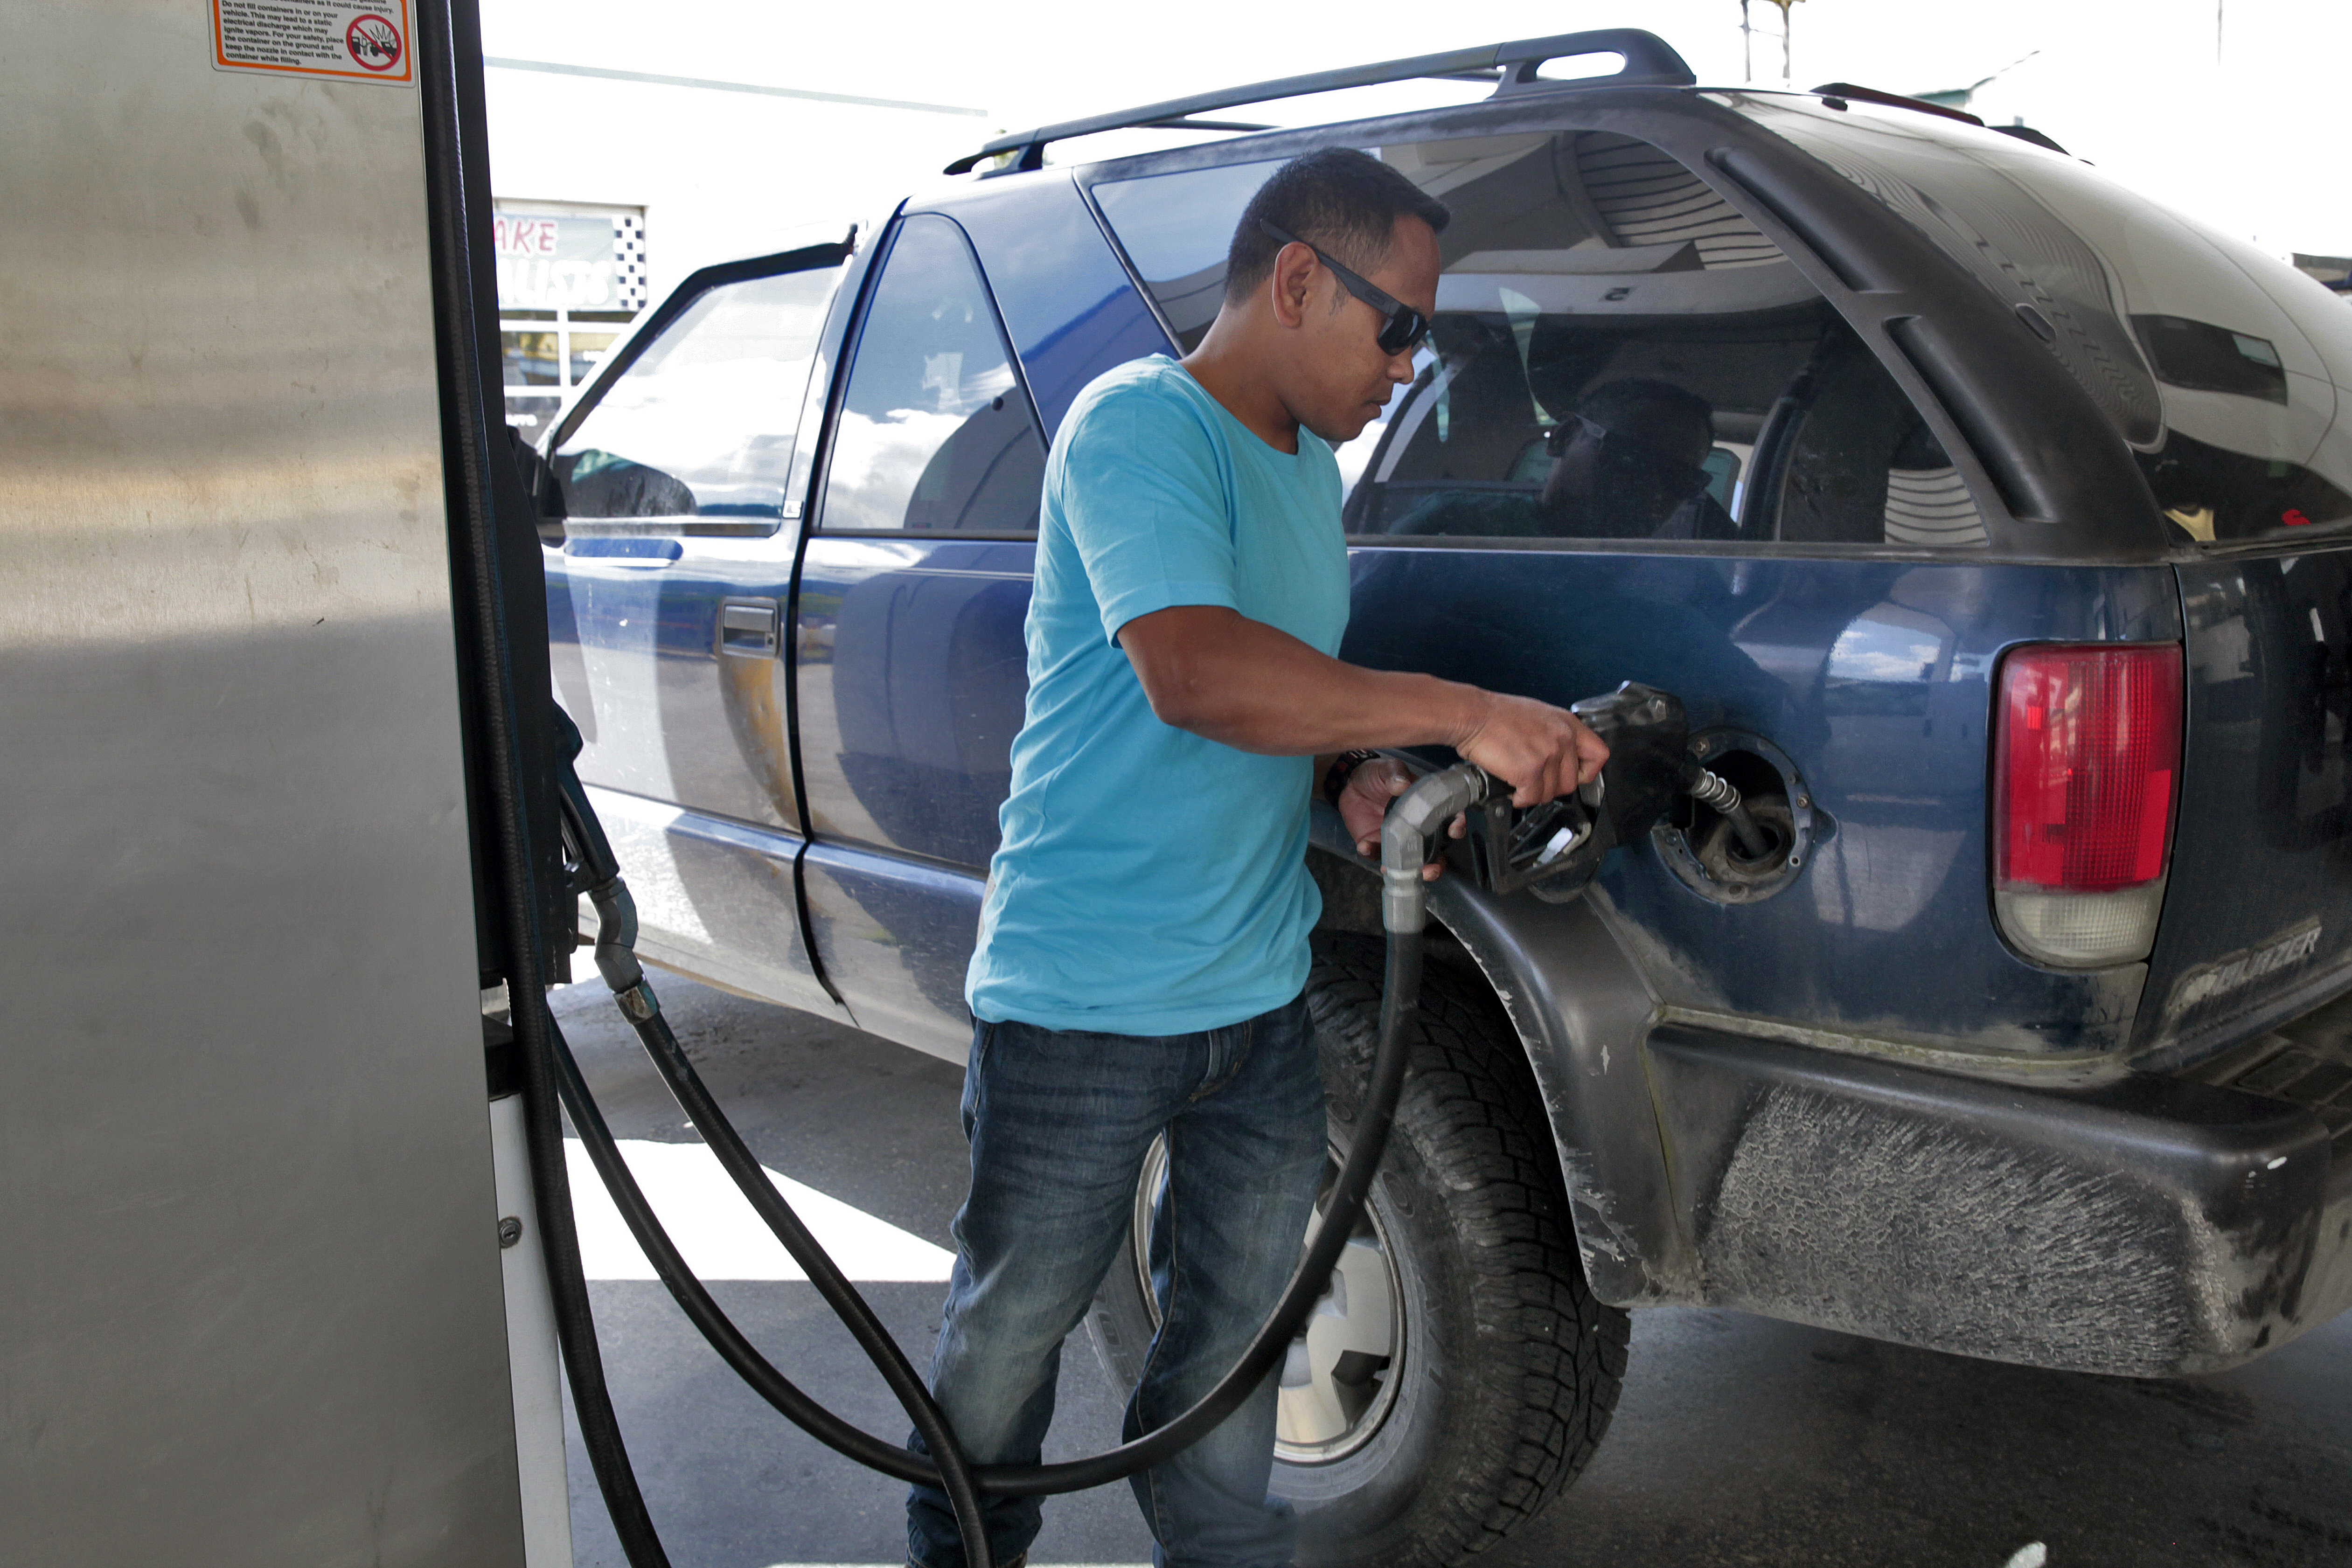 Richard Carrillo, of Juneau, gases up his suburban on July 7, 2016, in Juneau, Alaska. State economists said low energy prices caused a slower growth of inflation in Alaska last year. (Photo by Rashah McChesney, KTOO - Juneau)